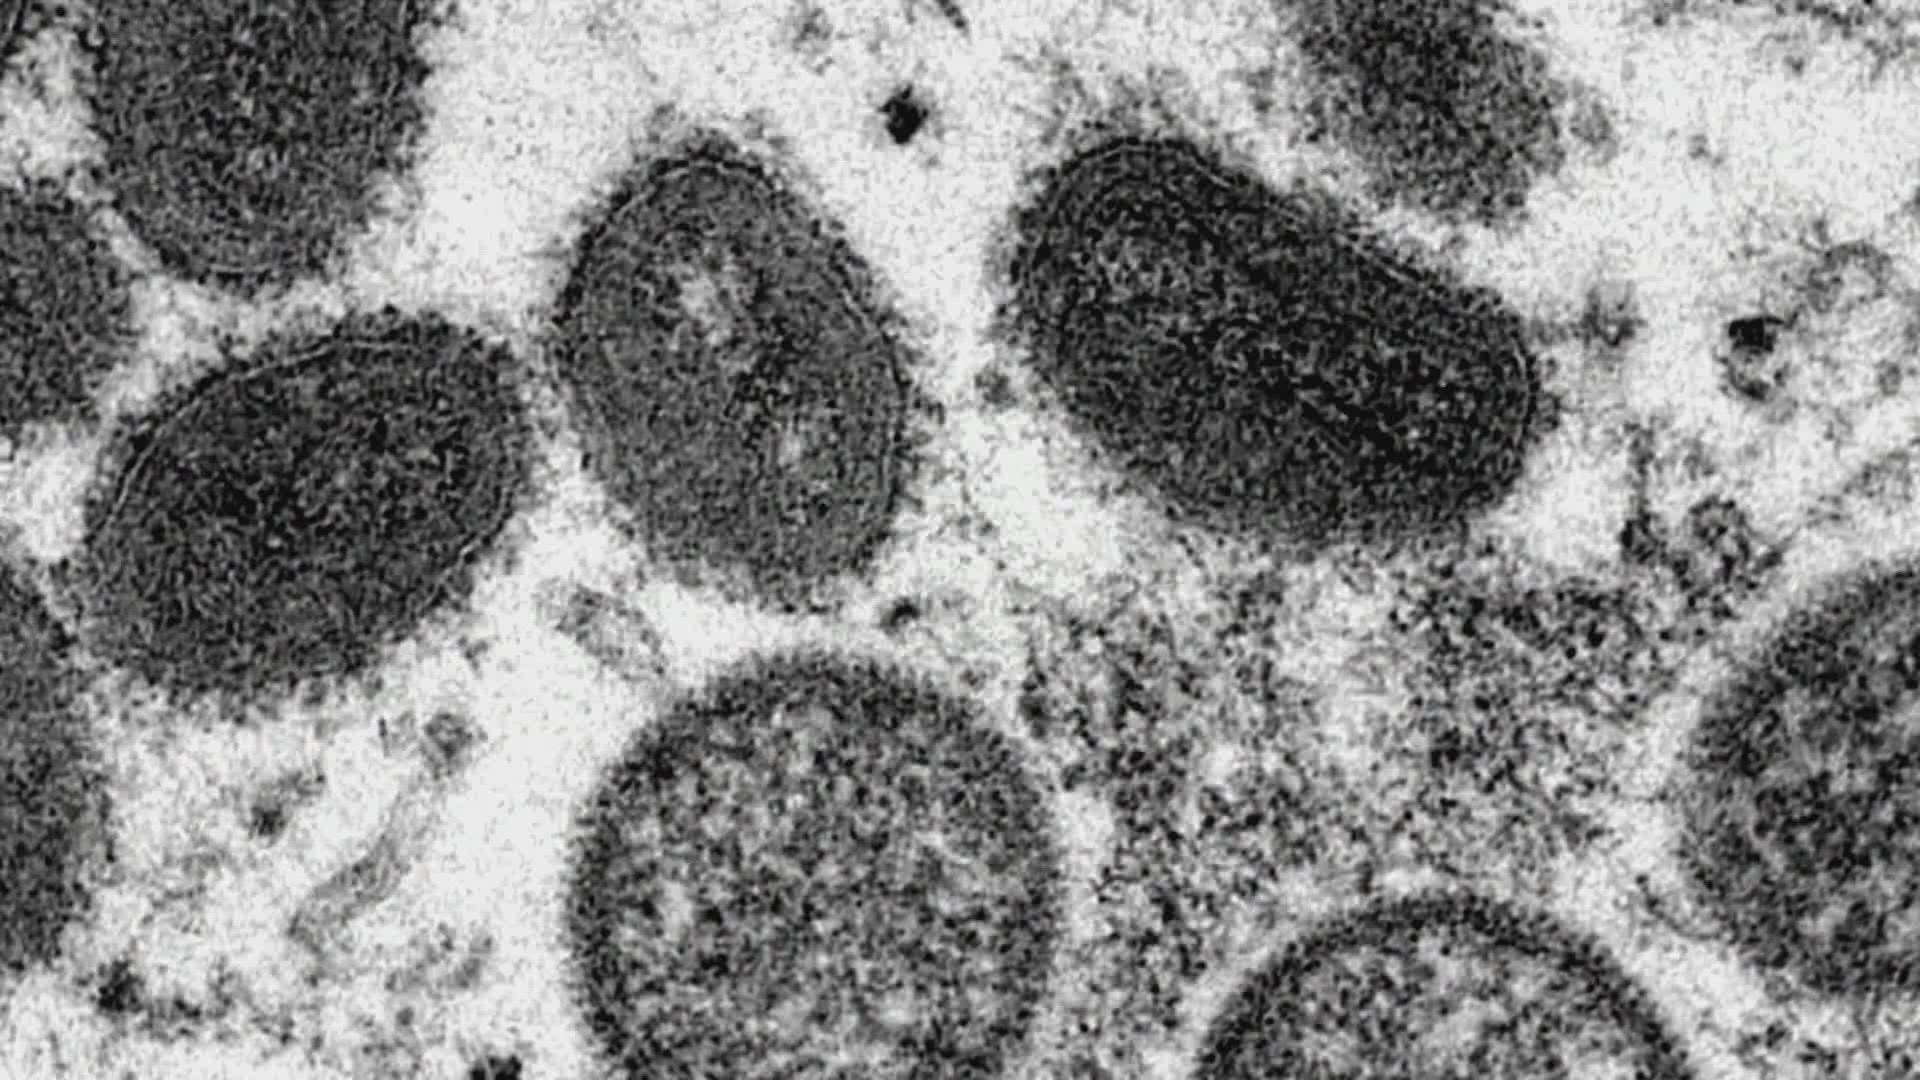 A monkeypox case was confirmed in a 17-year-old in Washington state. The Department of Health declined to specify the county for privacy reasons.